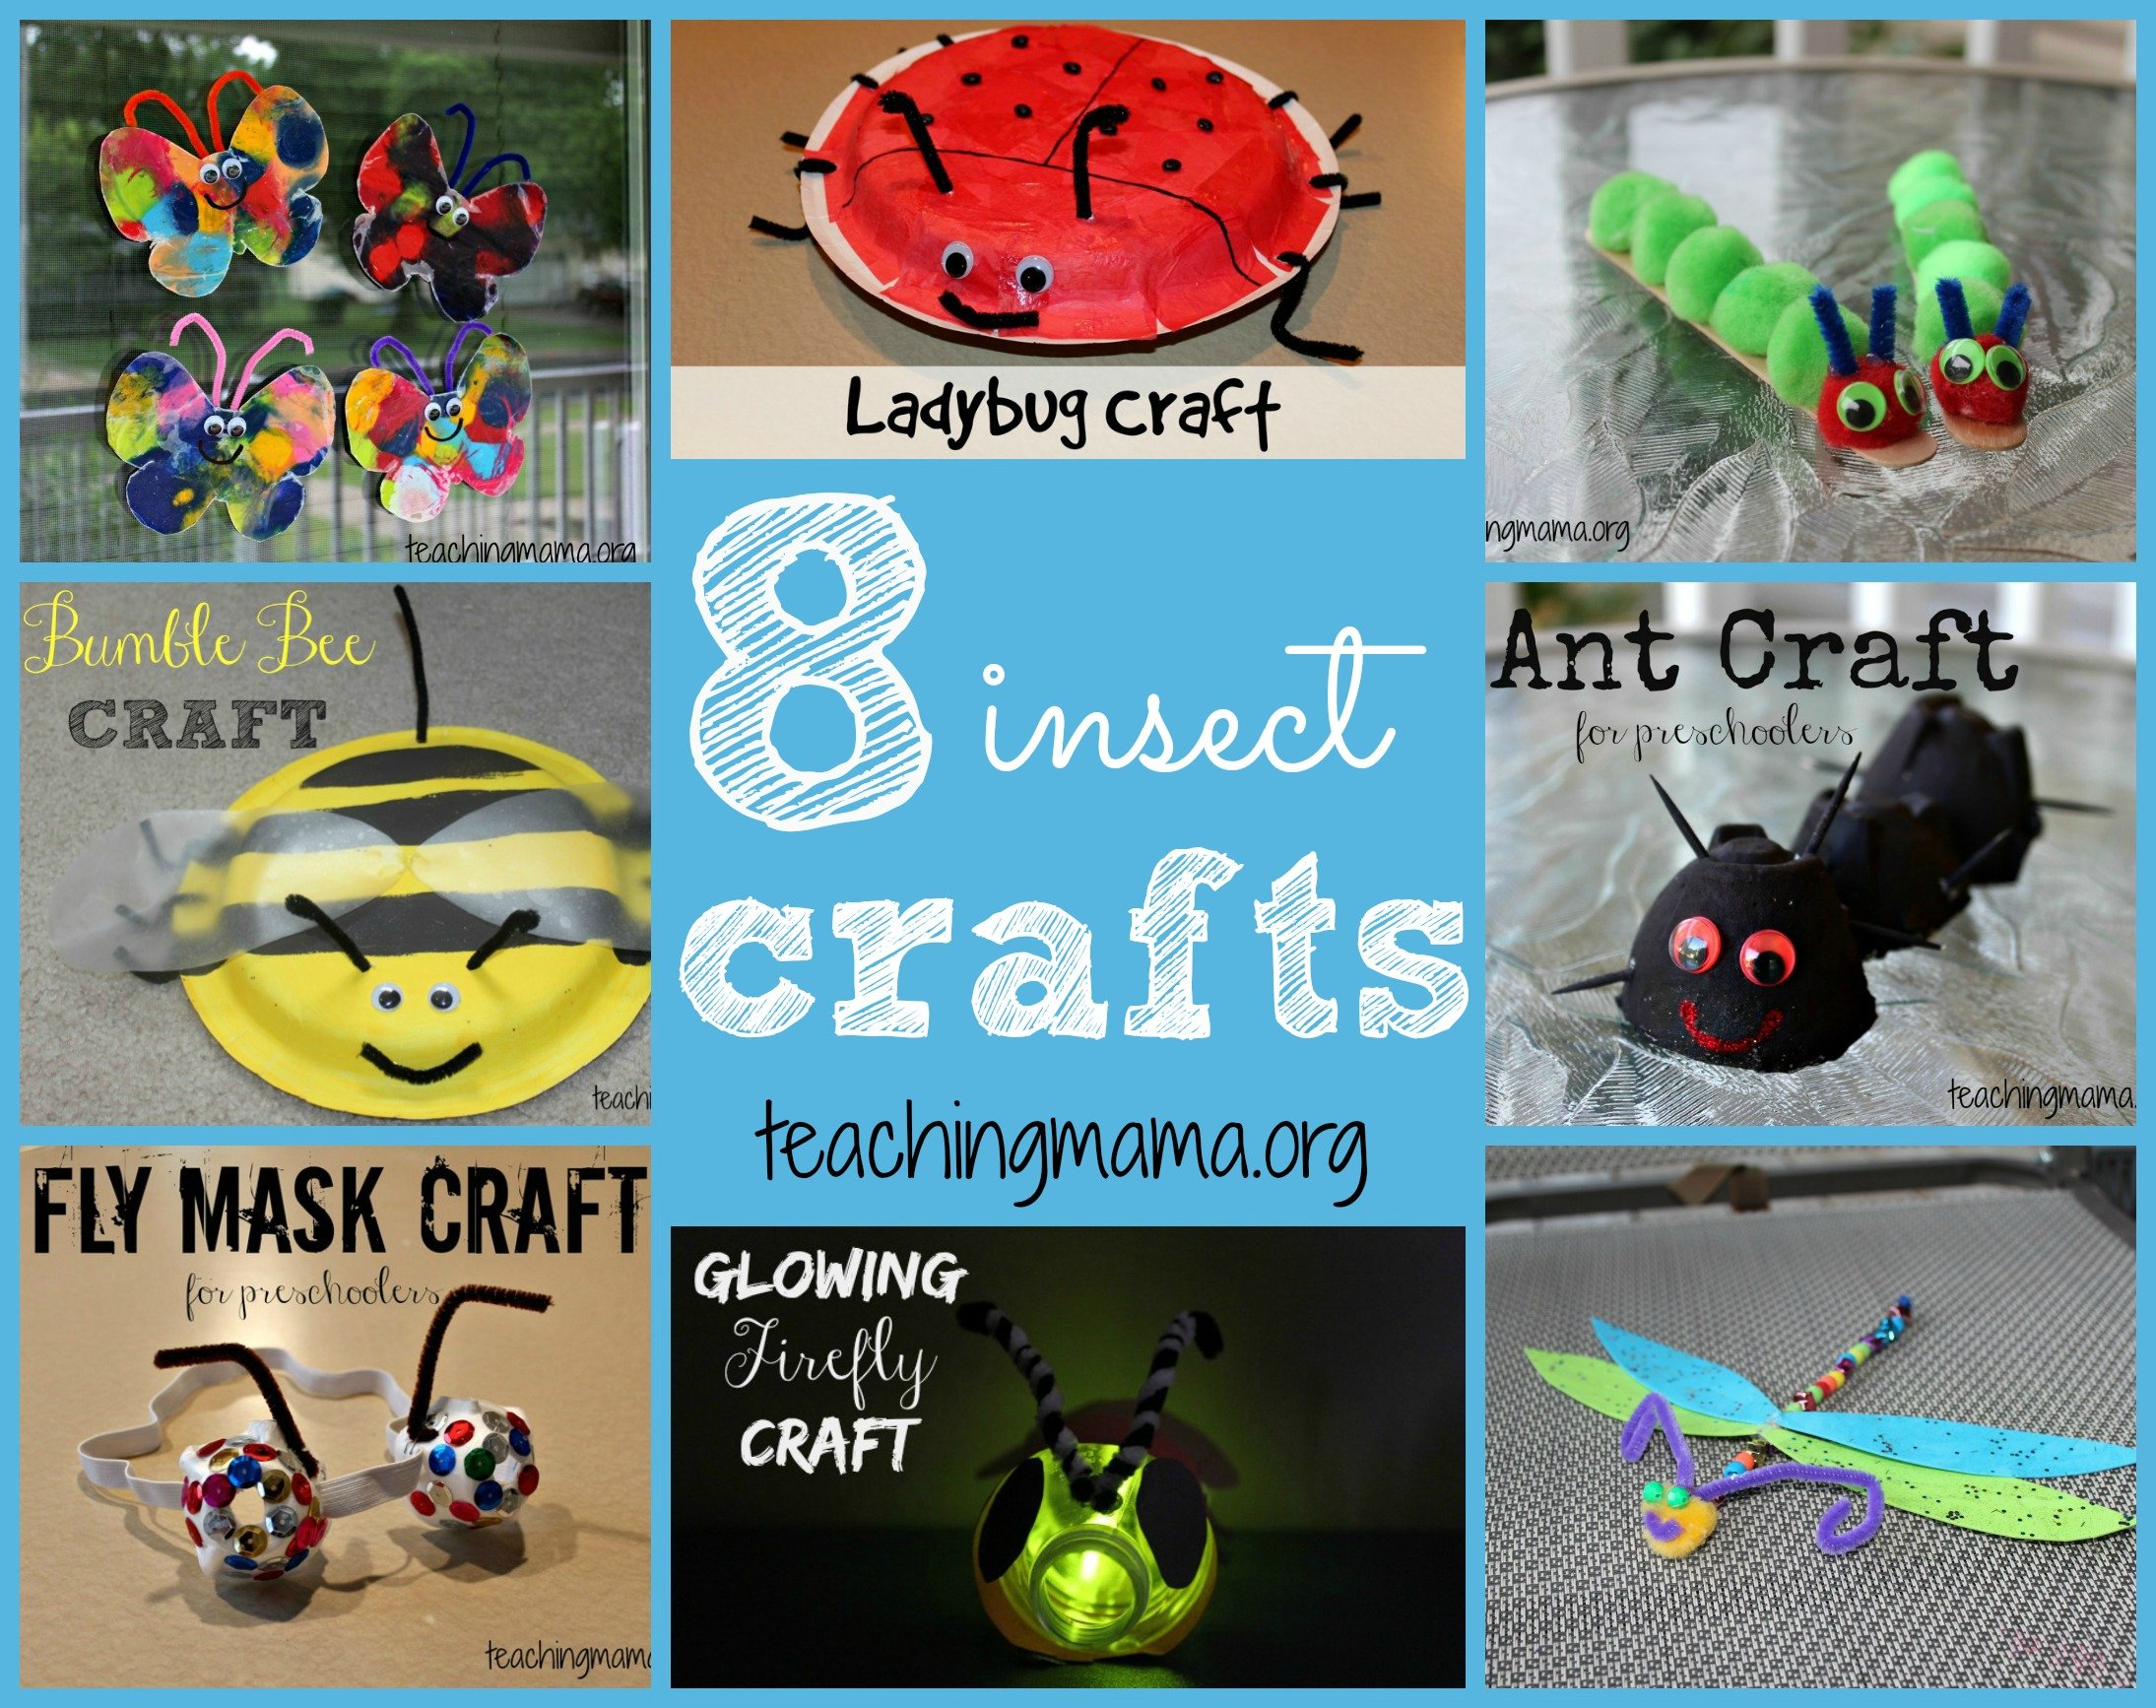 8 Insect Crafts for Kids